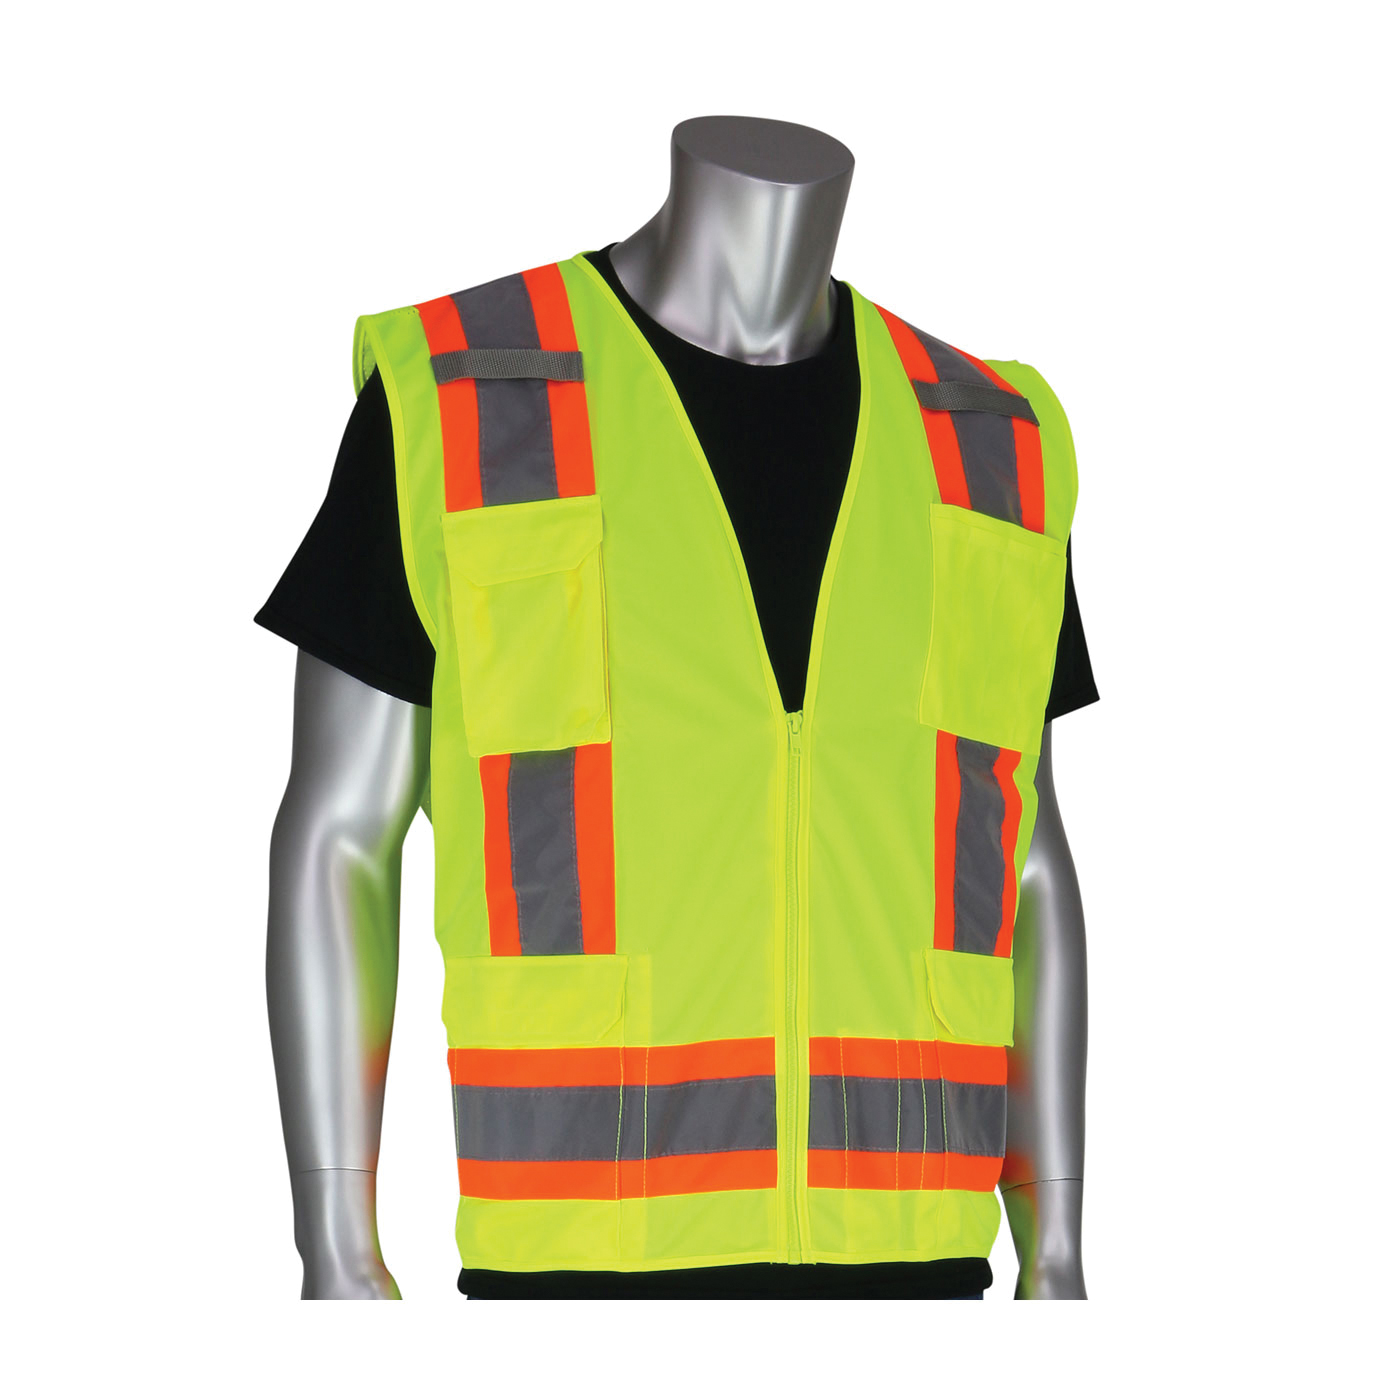 PIP® 302-0500S-YEL/2X 2-Tone Surveyor Safety Vest, 2XL, Hi-Viz Lime Yellow, Polyester/Solid Tricot, Zipper Closure, 11 Pockets, ANSI Class: Class 2, Specifications Met: ANSI 107 Type R